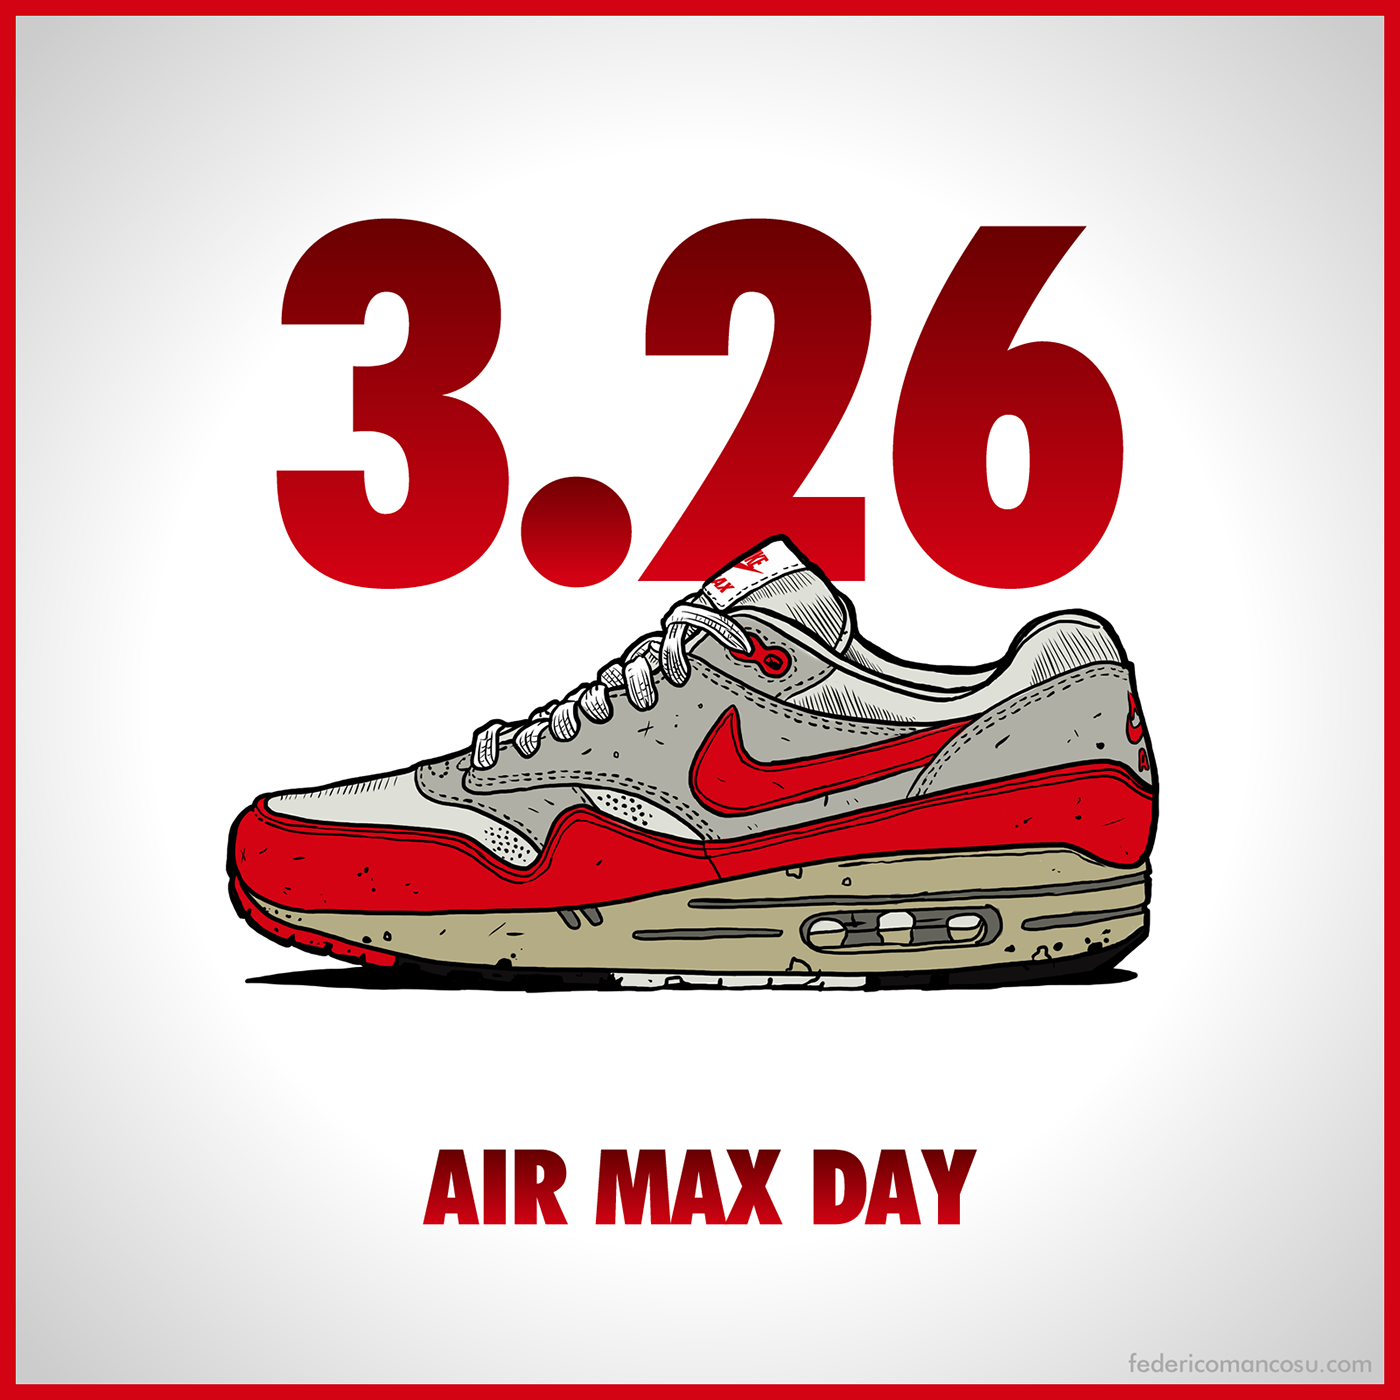 NIKE AIR MAX DAY - Tribute Artwork on 